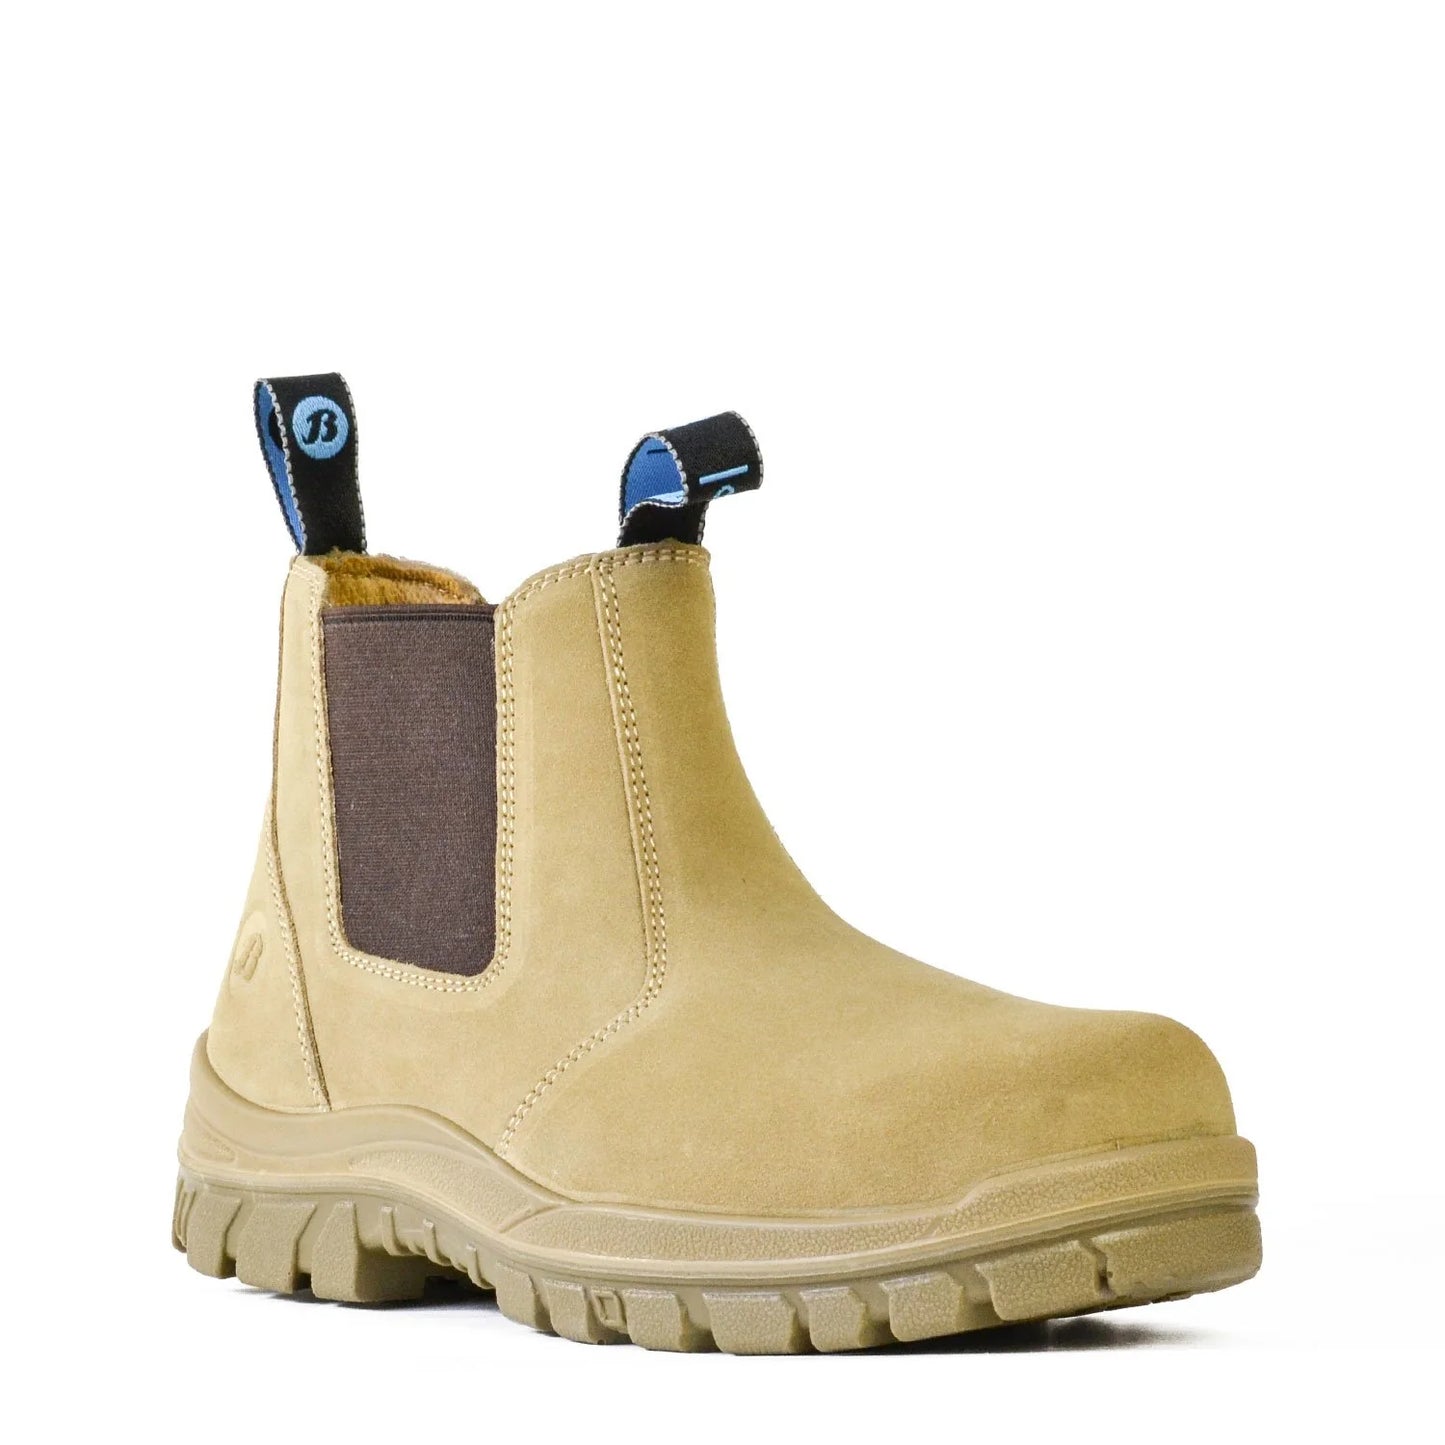 Mercury Suede Elastic Side Safety Boot - made by Bata Industrial